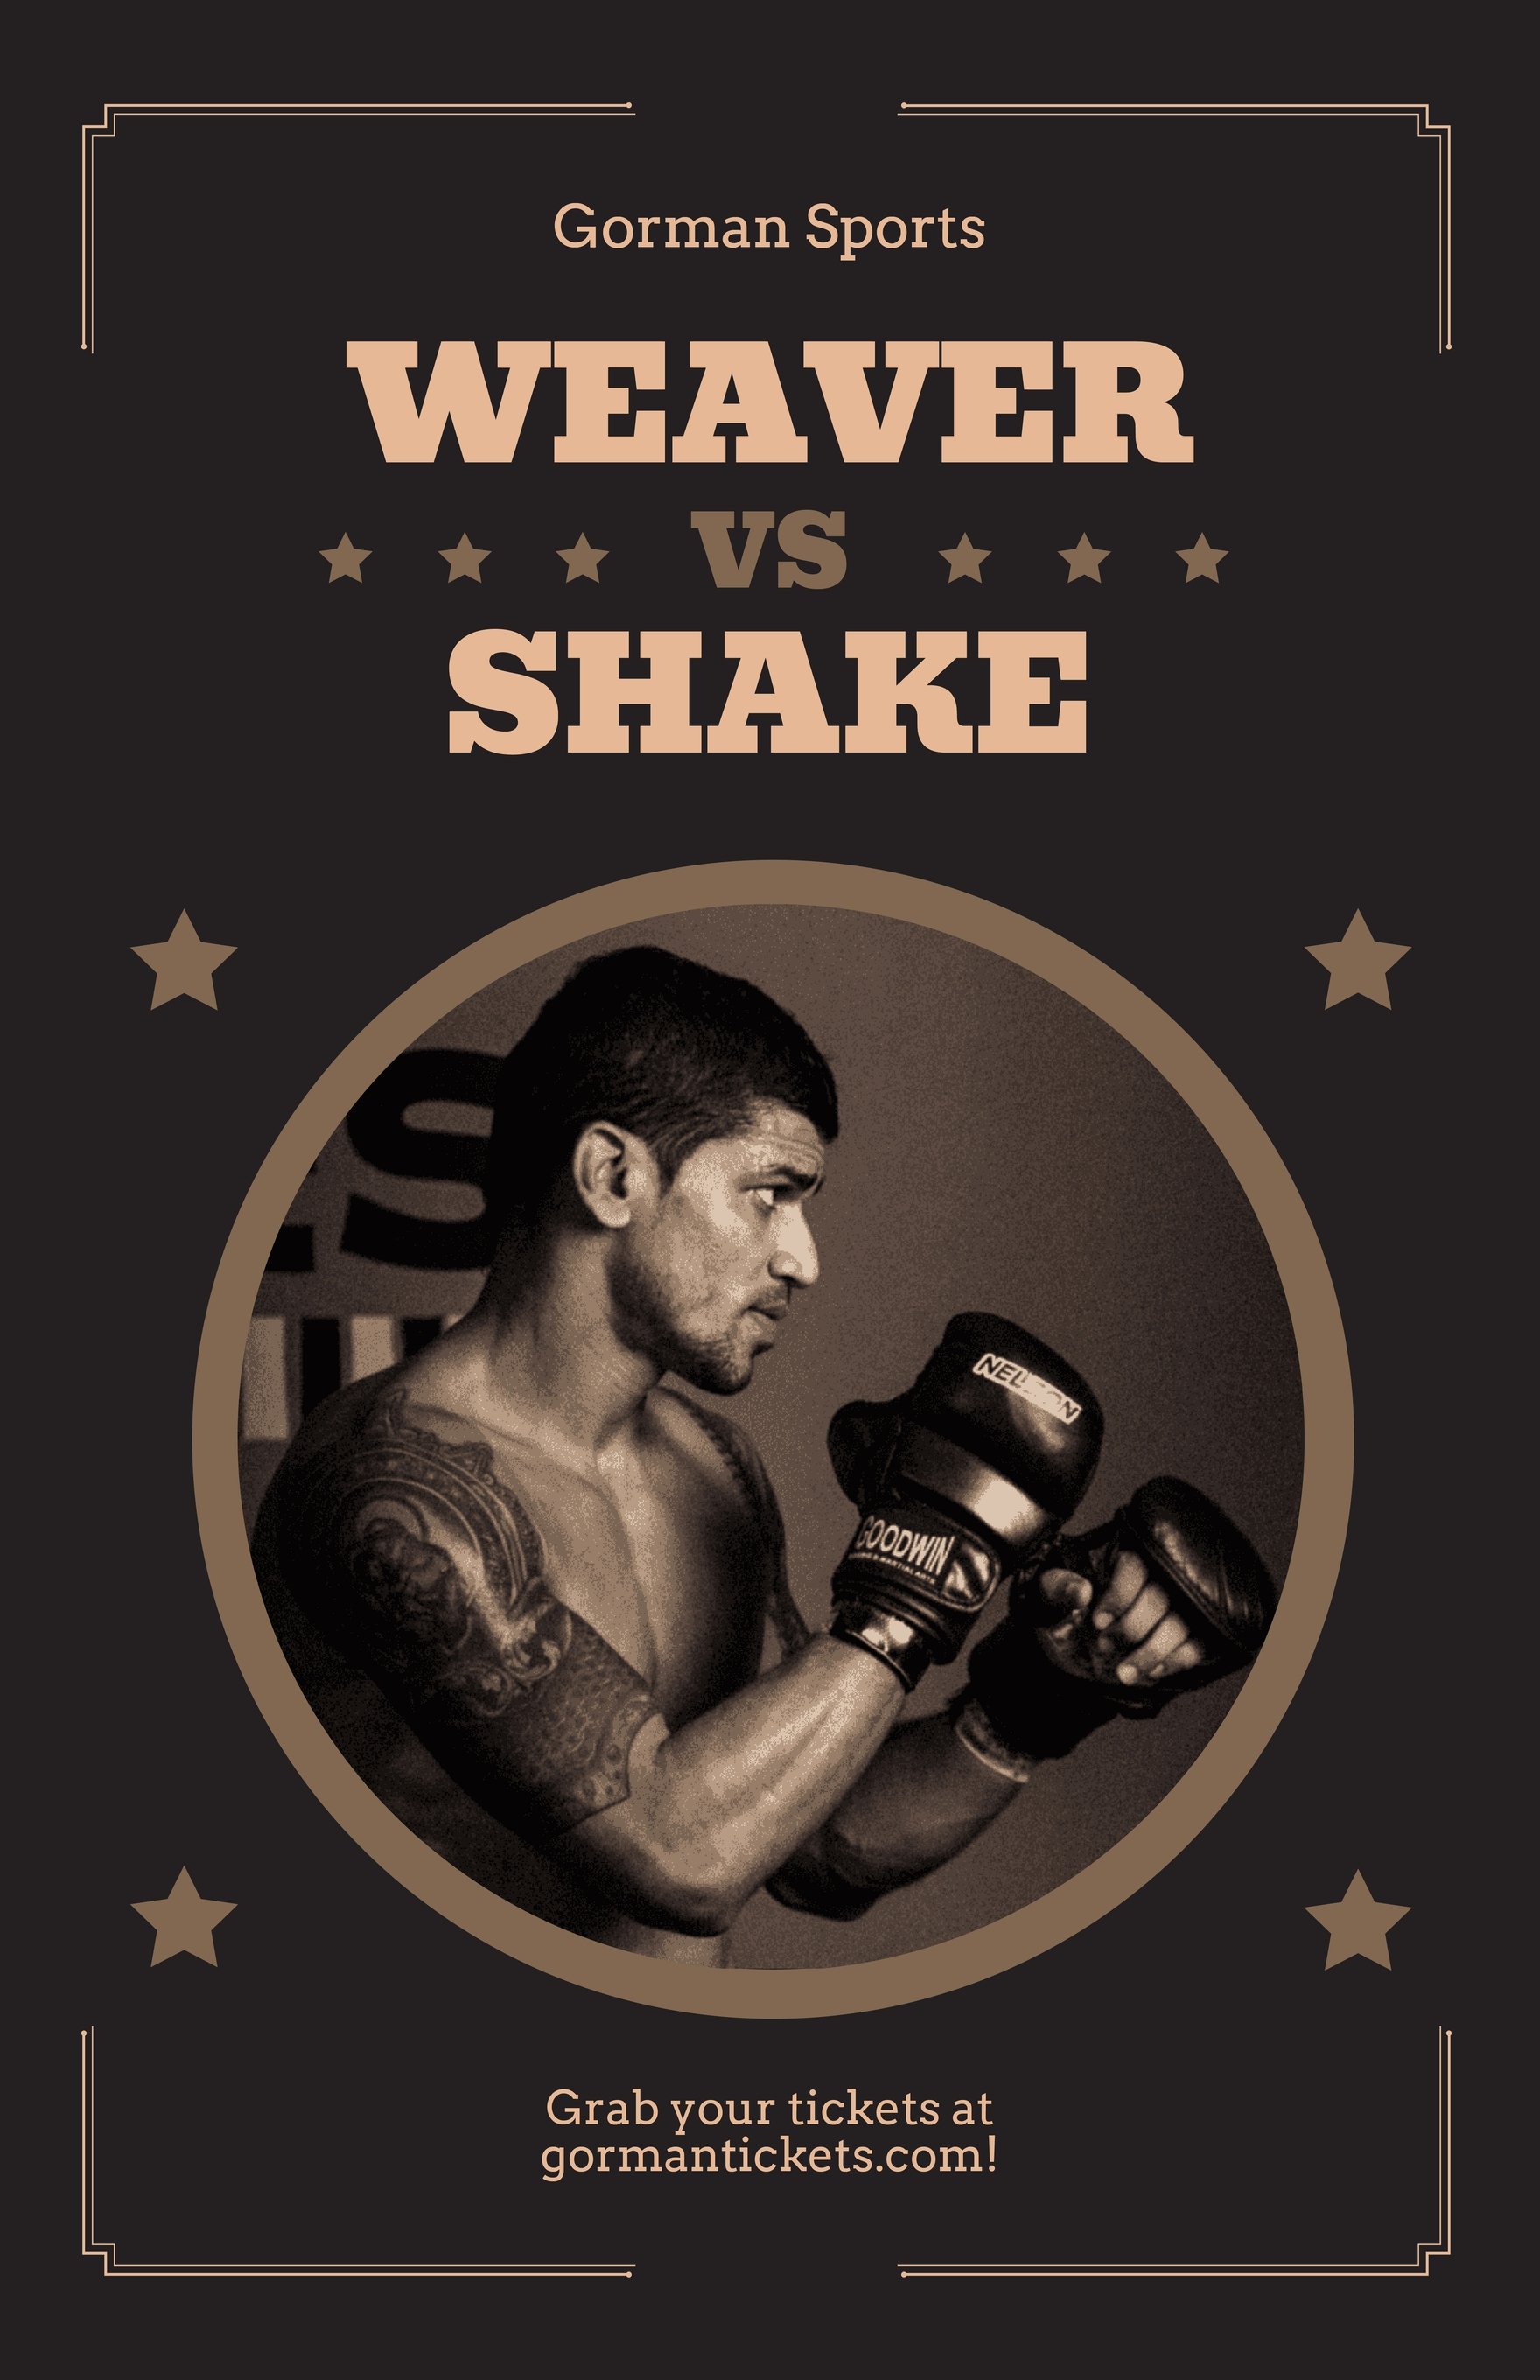 Old School Boxing Poster Template in Word, Illustrator, PSD, Apple Pages